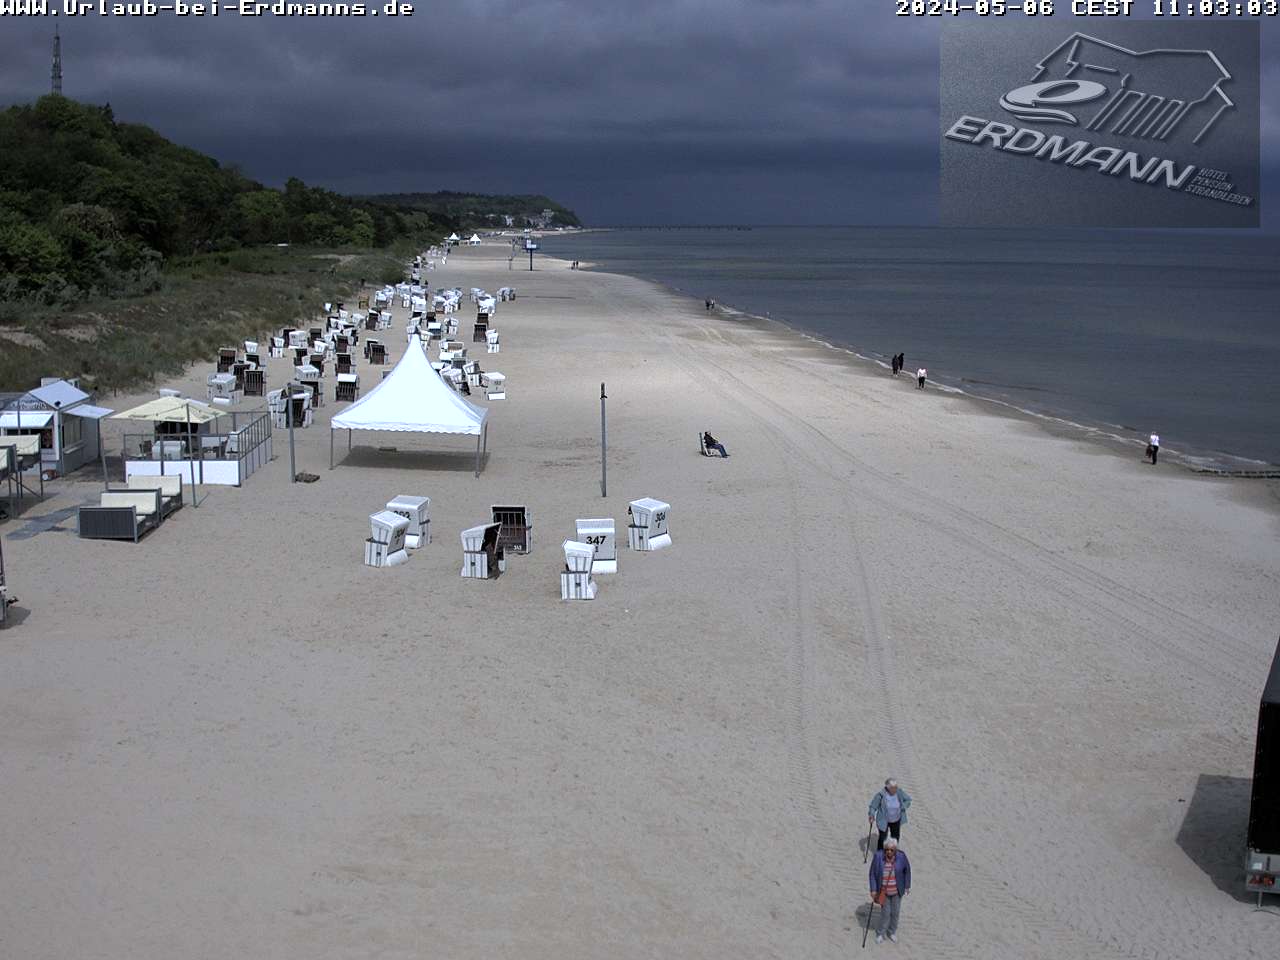 Webcam Heringsdorf (Usedom): View from the Pier